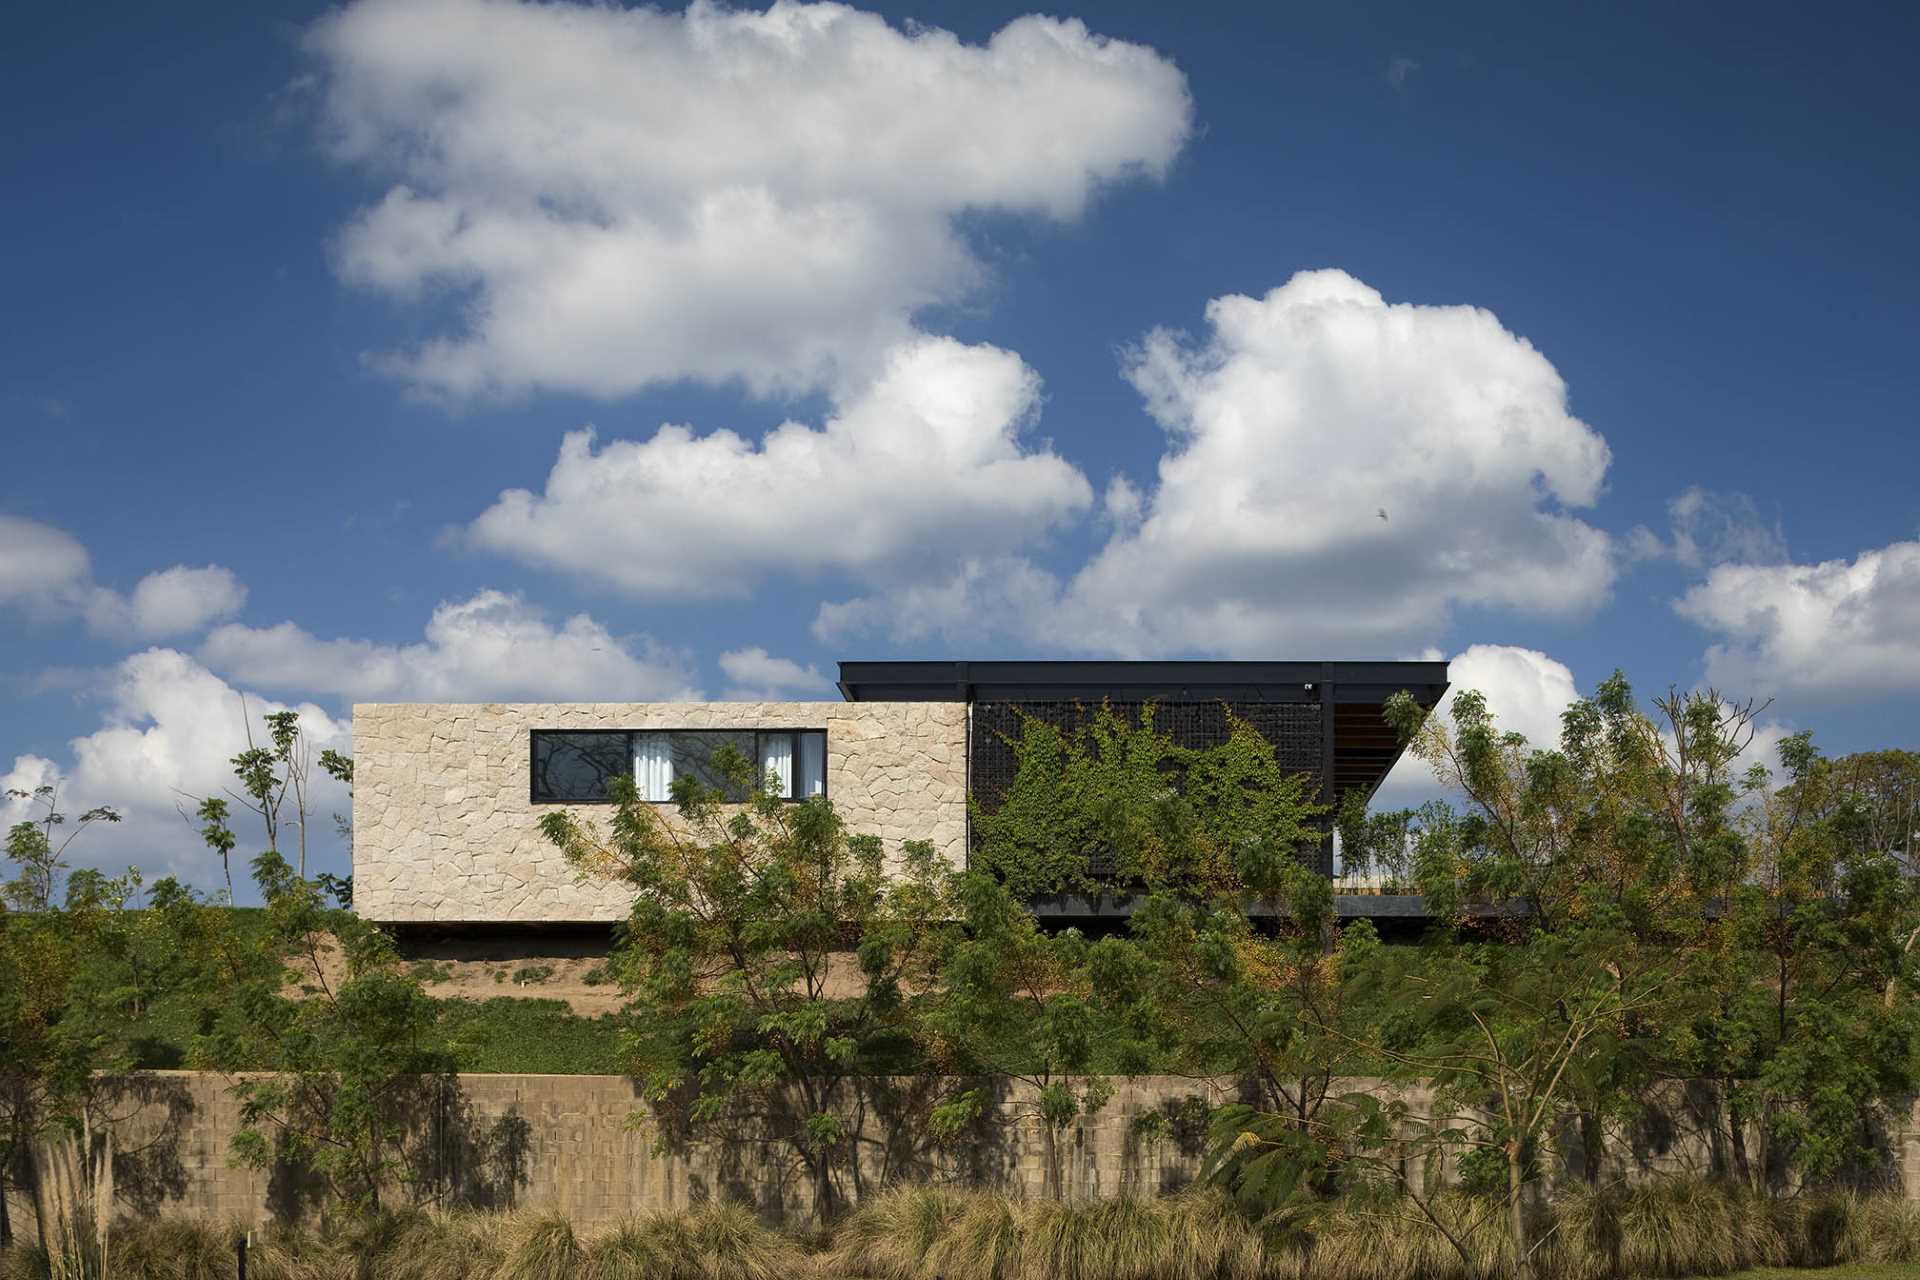 A modern house with stone walls.